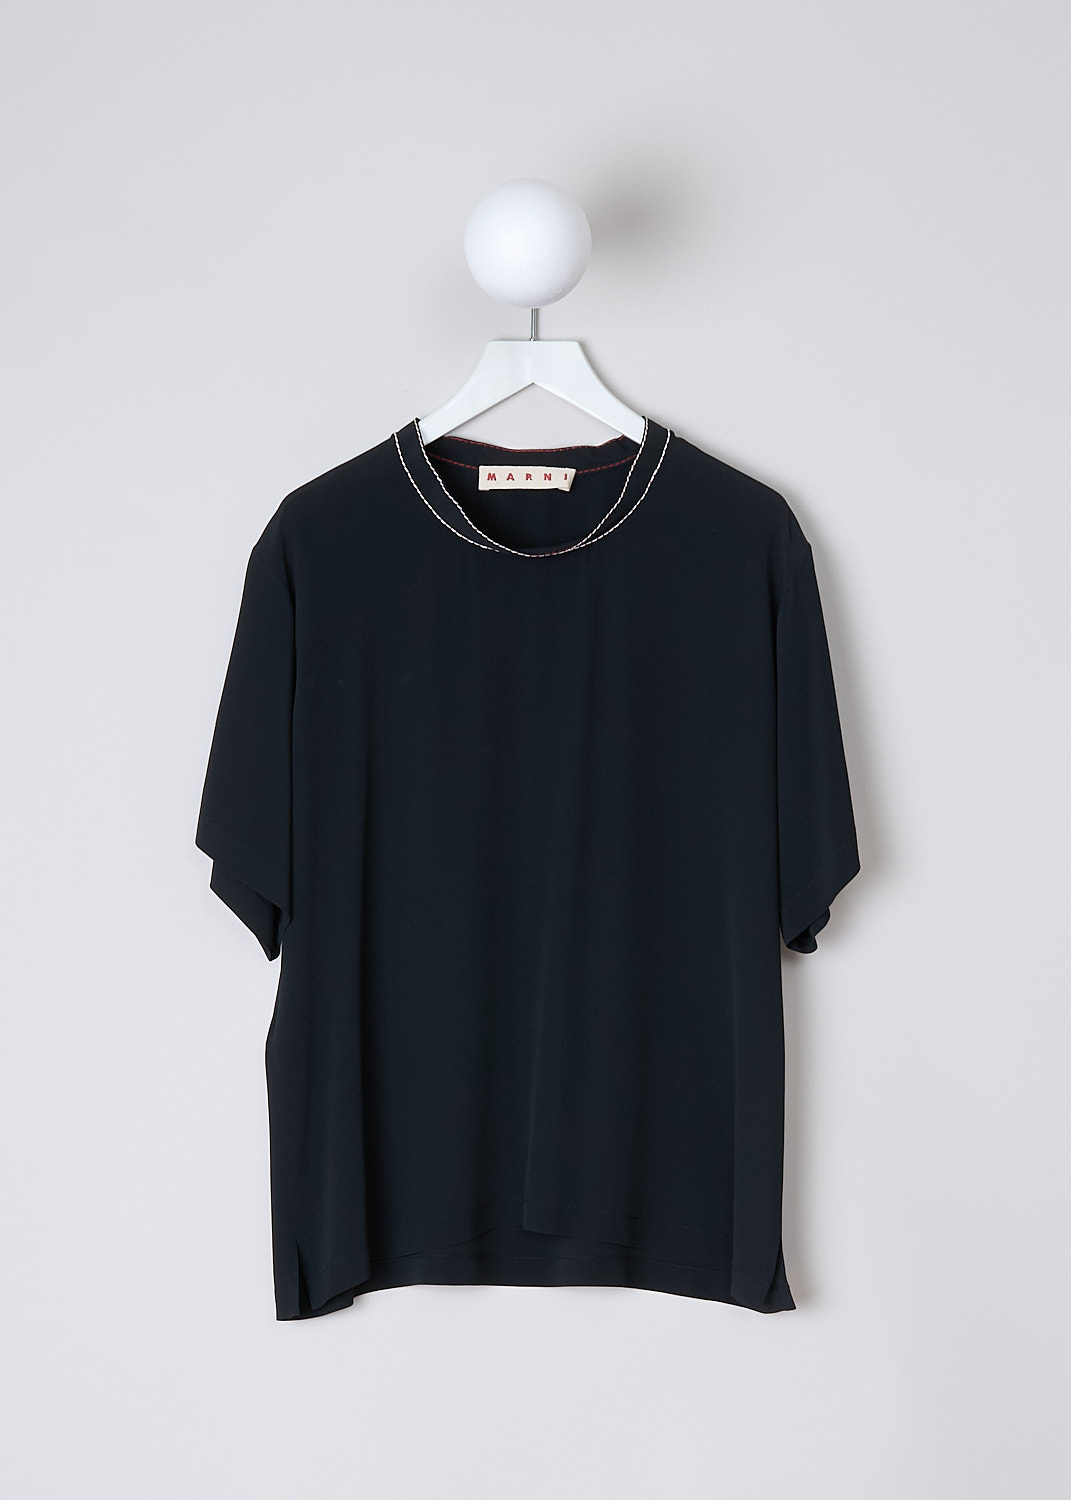 MARNI, BLACK WASHED CRÊPE TOP WITH CONTRAST STITCHING, CAMA0015M1_TA089_00N99, Black, Front, This black washed crêpe top has round neckline with white and red stitching. The top has short sleeves and an asymmetric hemline with small slits. 
